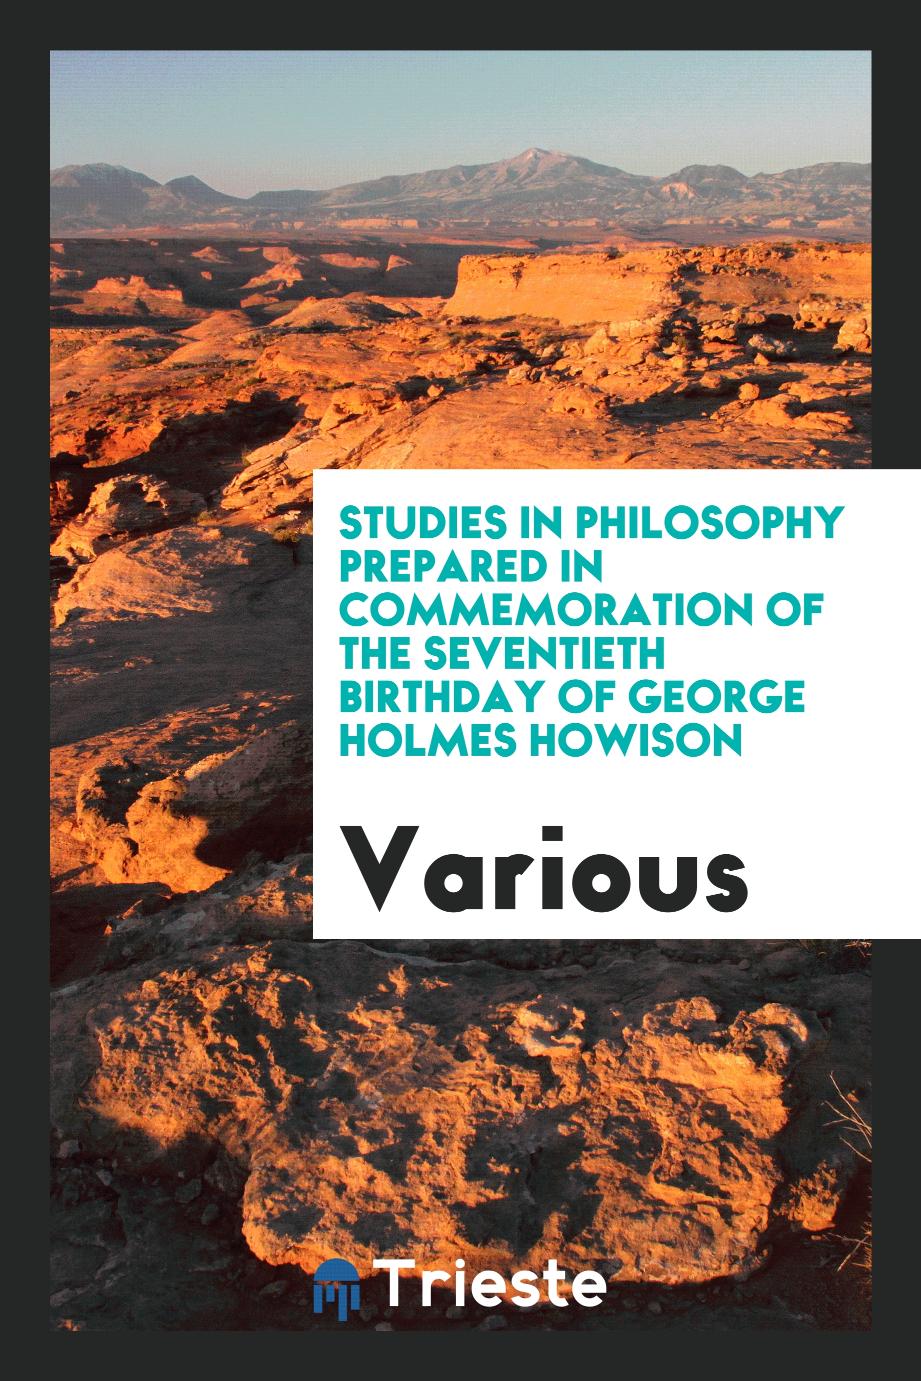 Studies in Philosophy Prepared in Commemoration of the Seventieth Birthday of George Holmes Howison